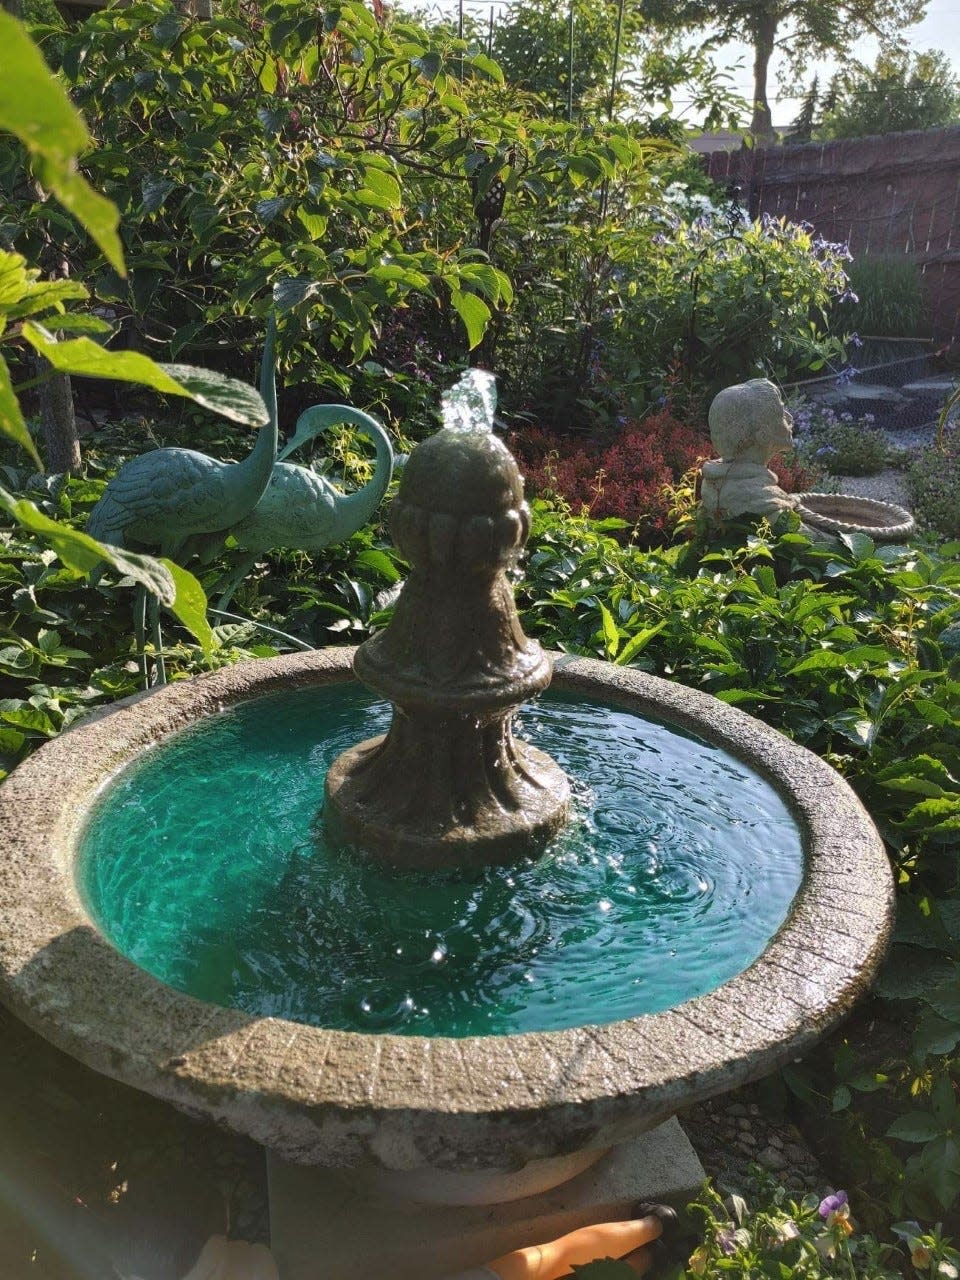 Five gardens will be shown on the South Milwaukee Garden Club & Historical Society Garden Tour on June 24. Also part of the tour is a garden with more than 200 types of hostas to view or buy.